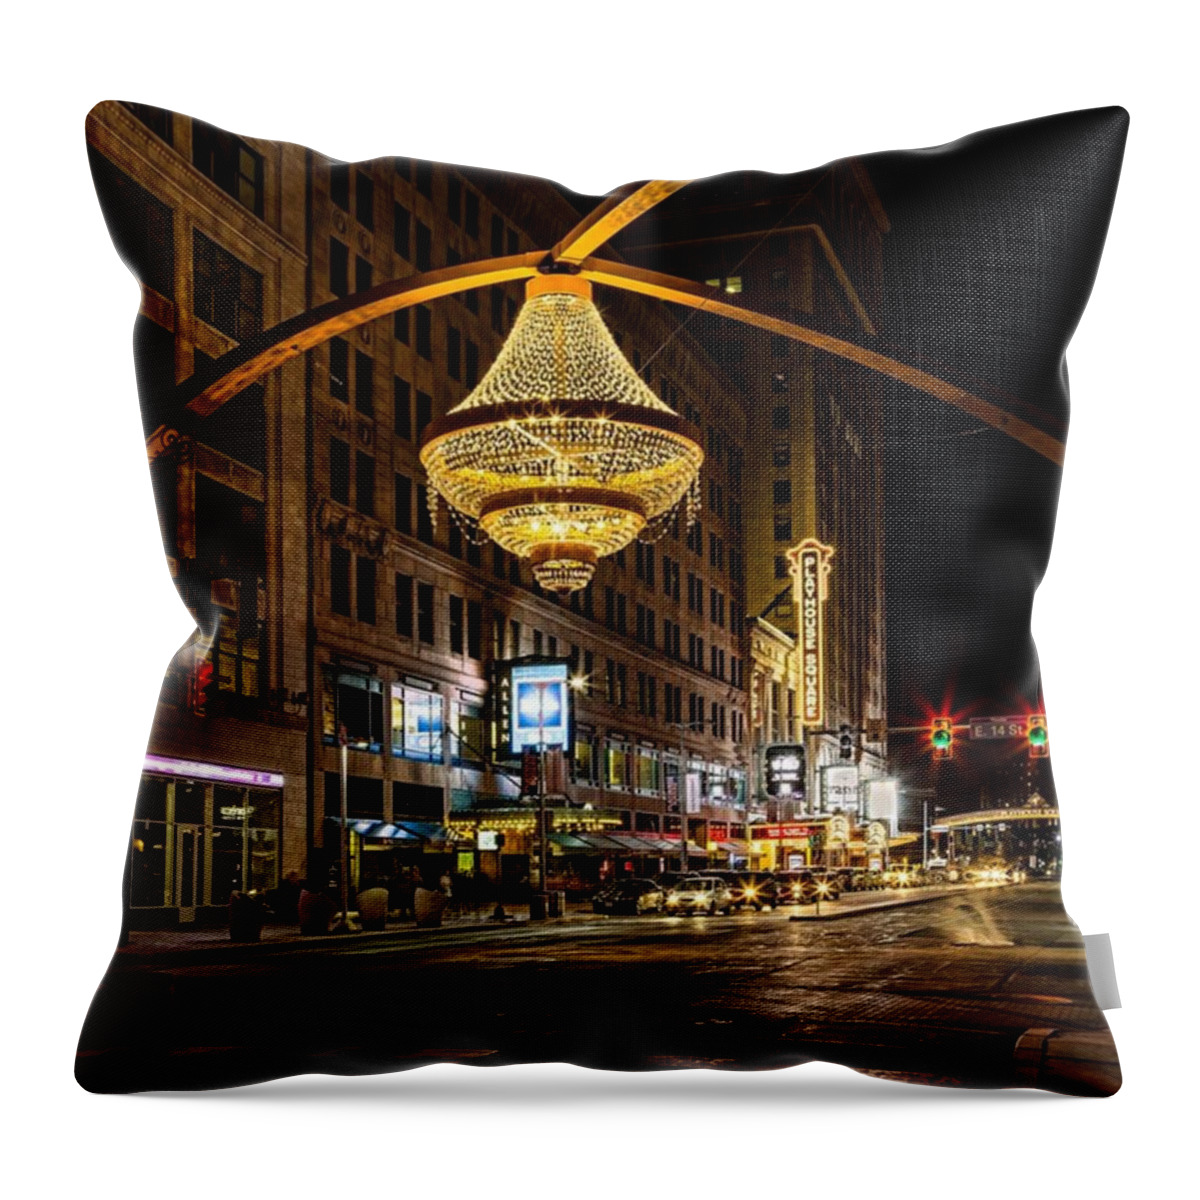  Throw Pillow featuring the photograph Playhouse Square #1 by Dale Kincaid